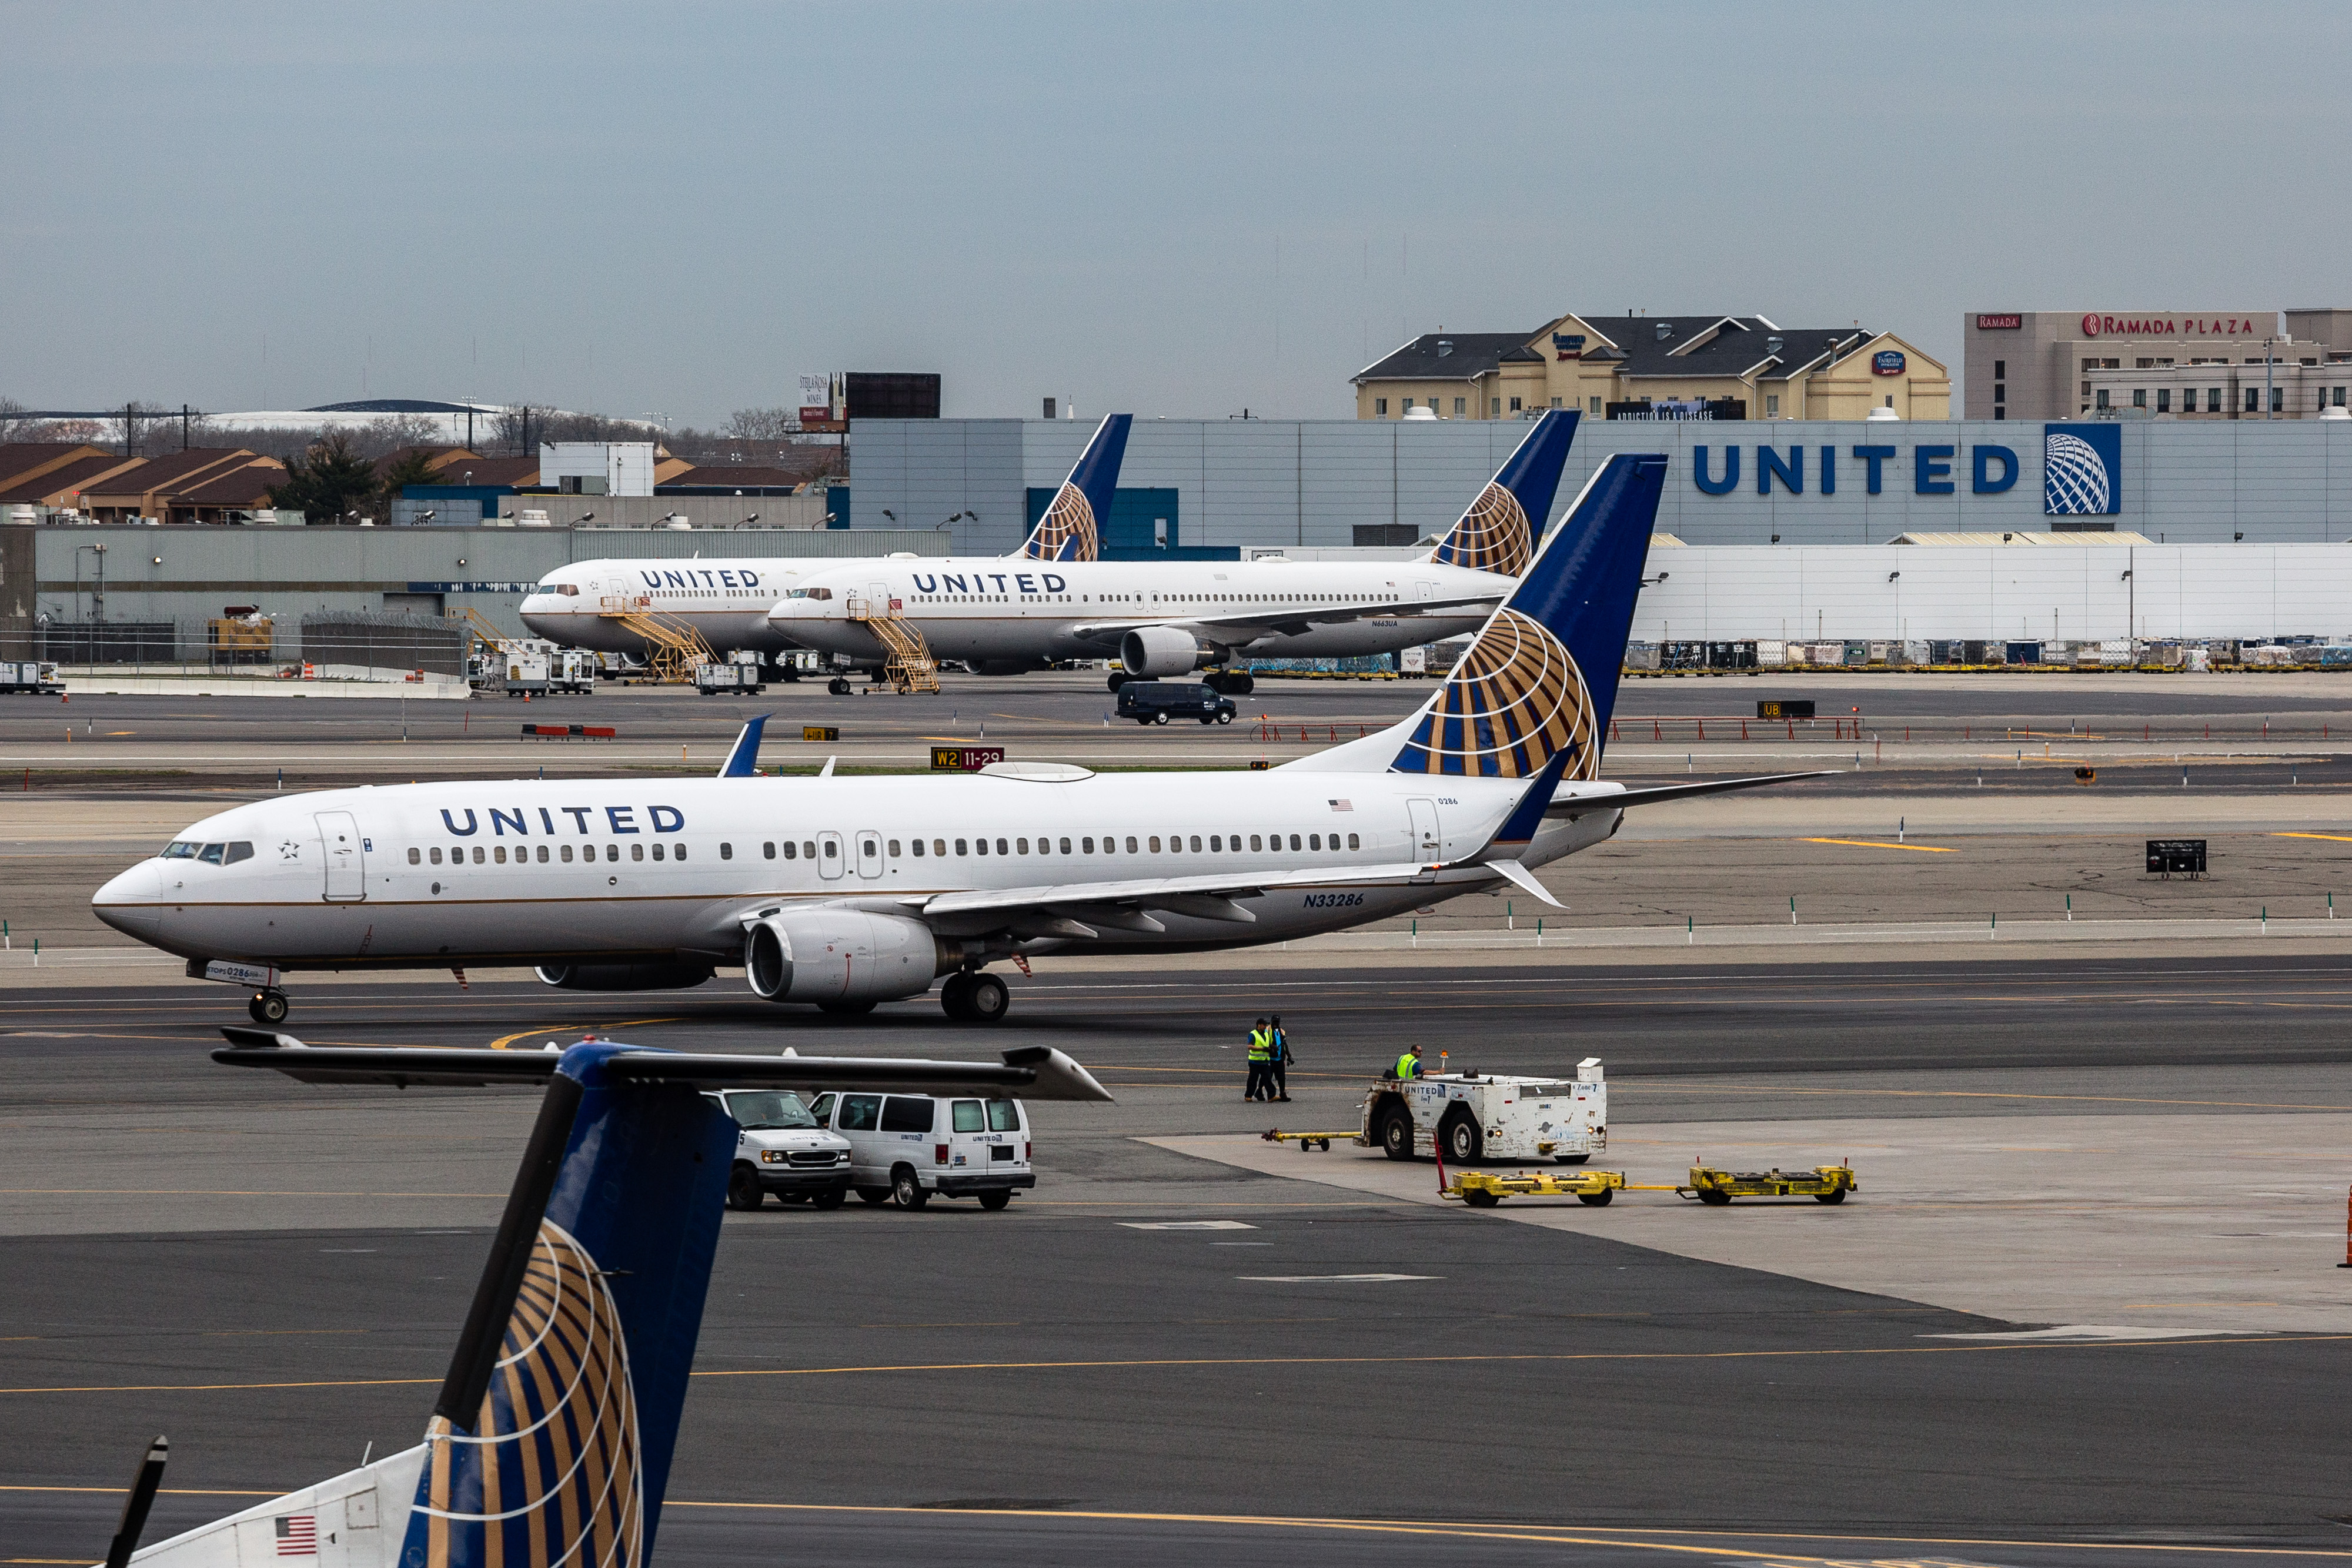 United airplanes outside the company's hangar at Newark Liberty International Airport (EWR) in Newark, New Jersey, on April  12, 2017. (Timothy Fadek—Bloomberg/Getty Images)